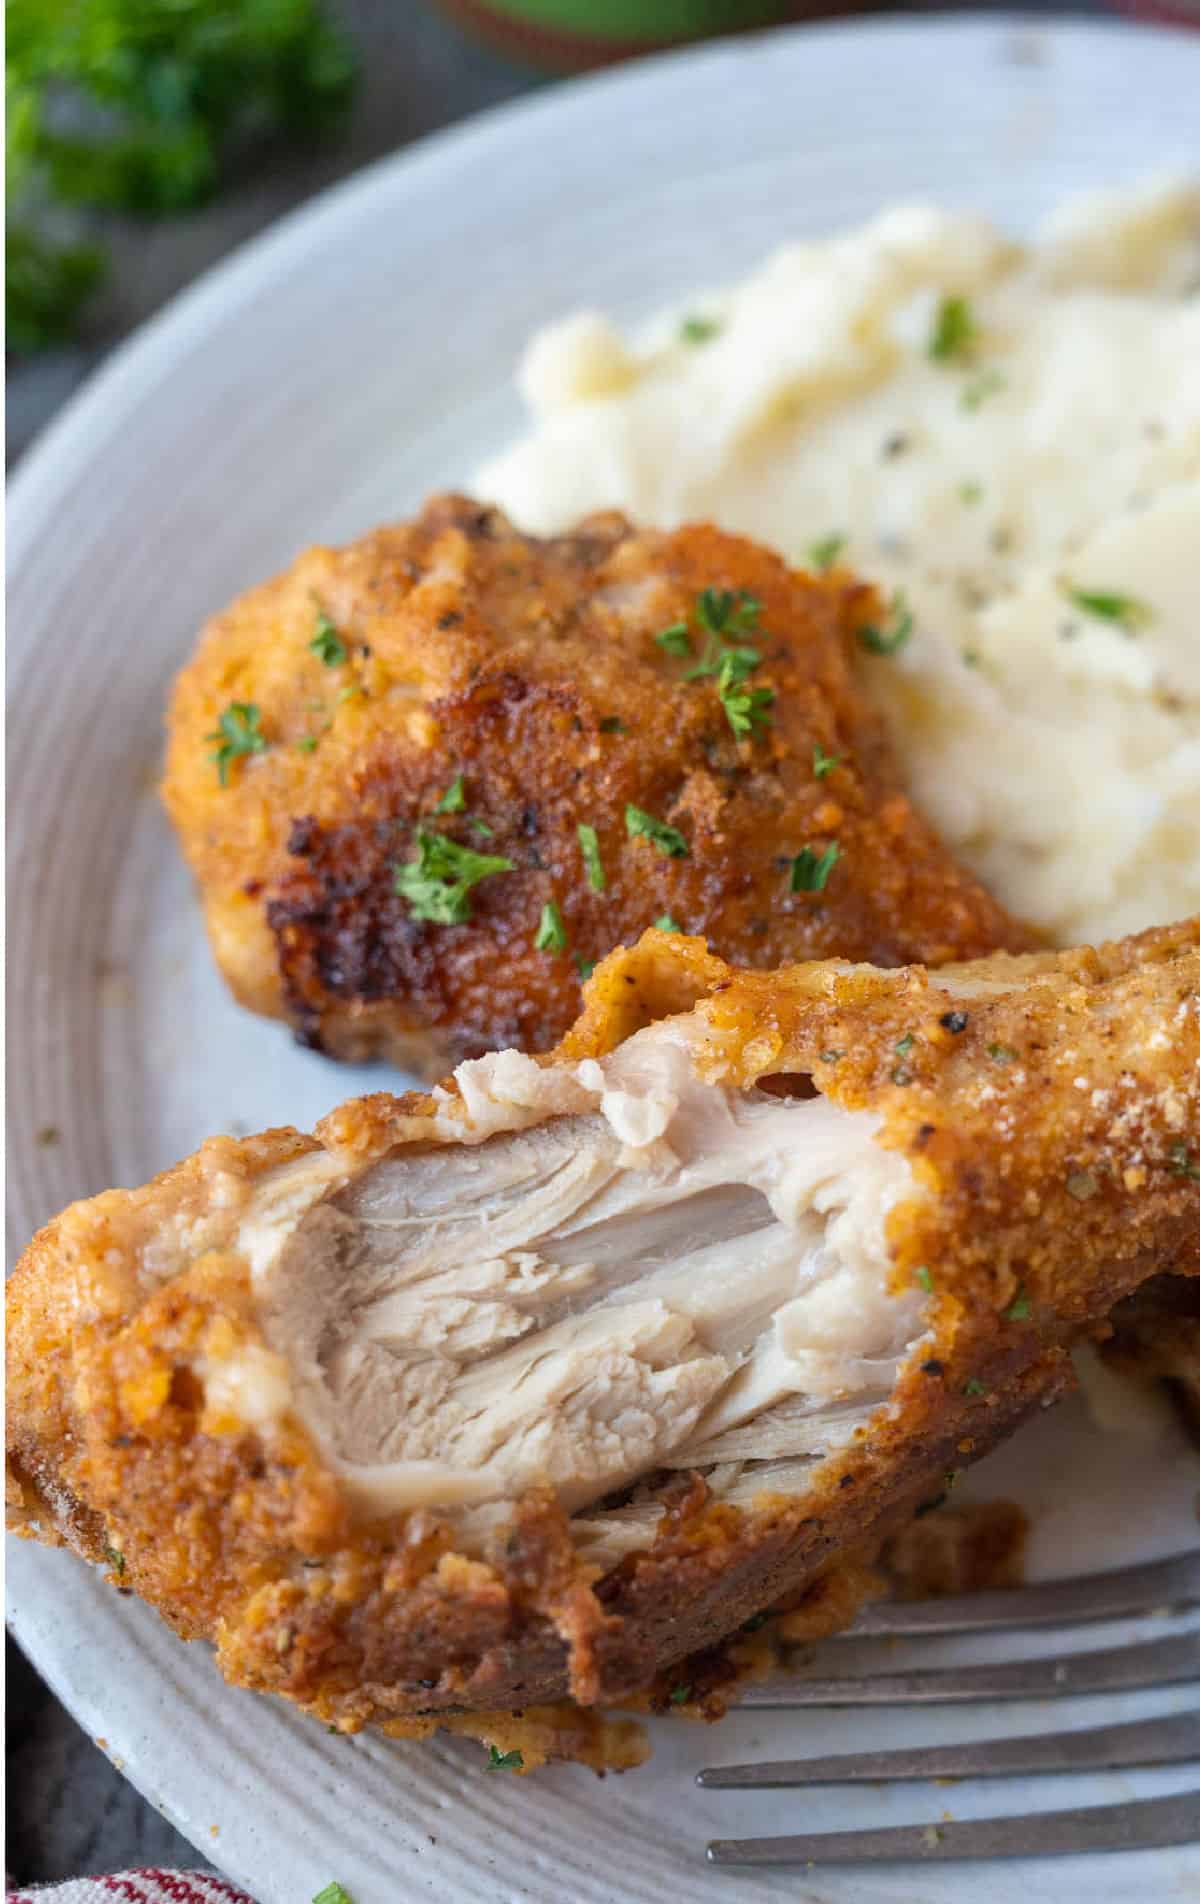 A bite out of a chicken leg placed on a plate with a side of mashed potatoes.